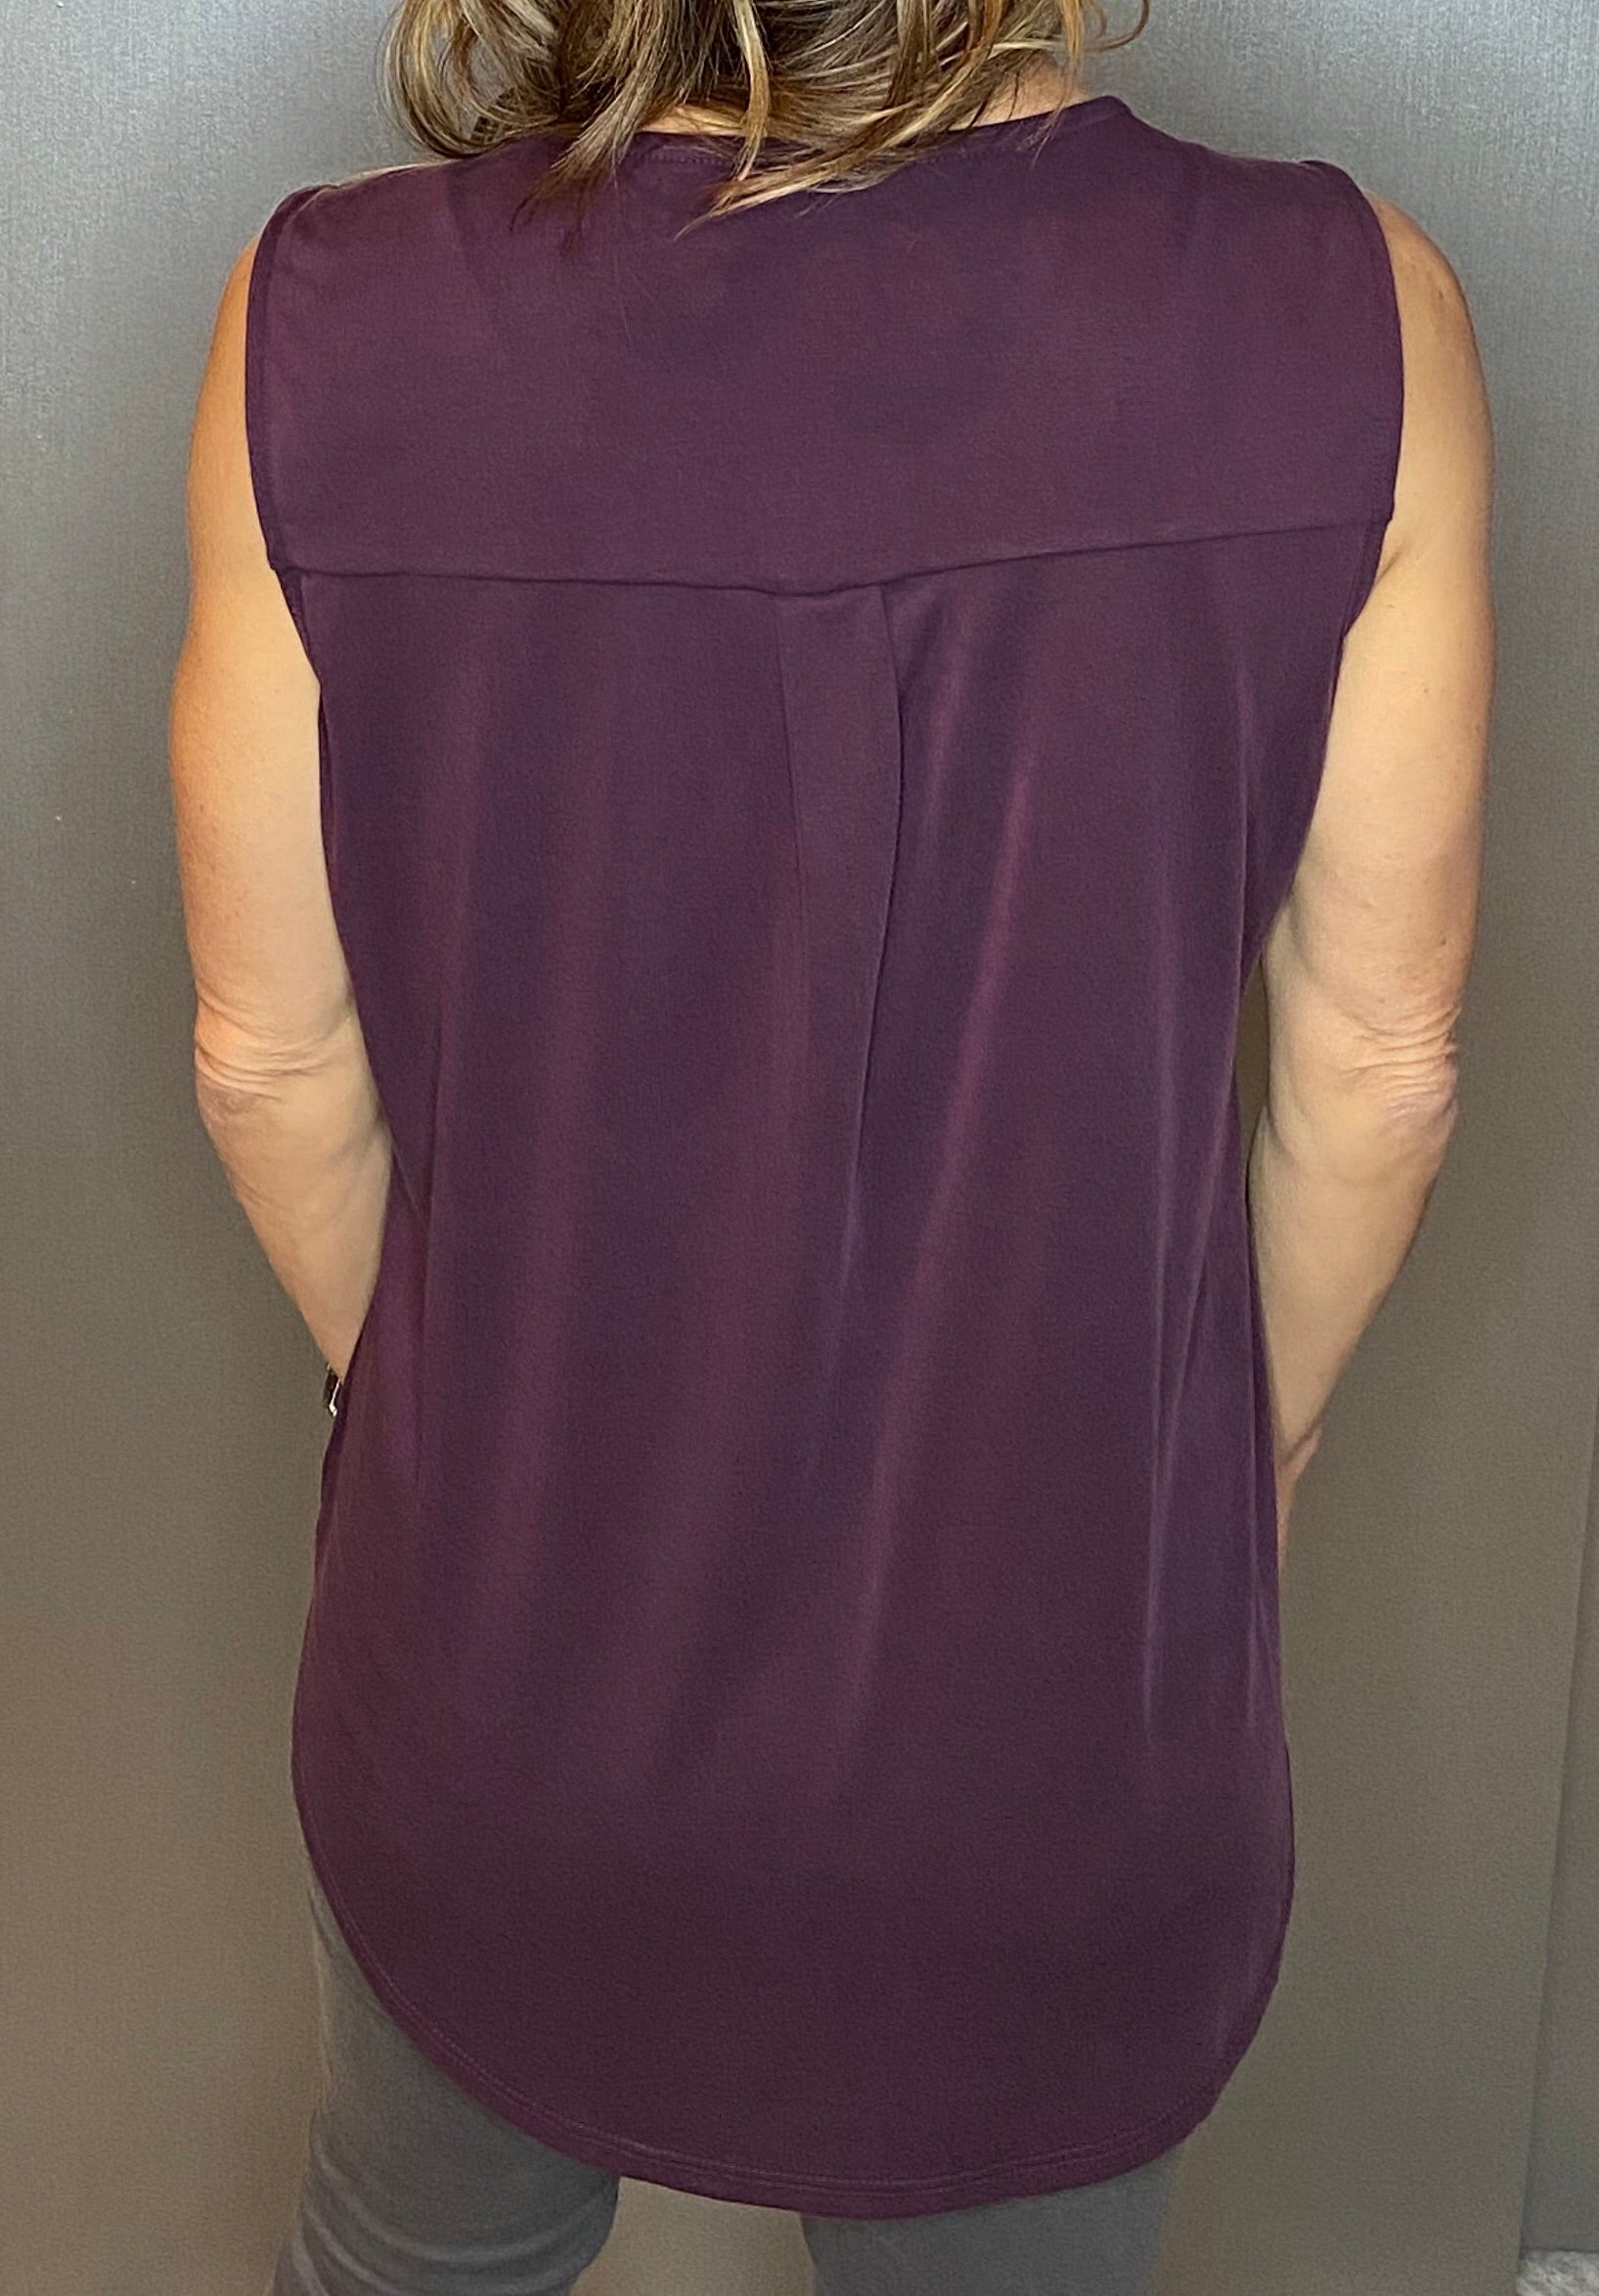 Sleeve less top